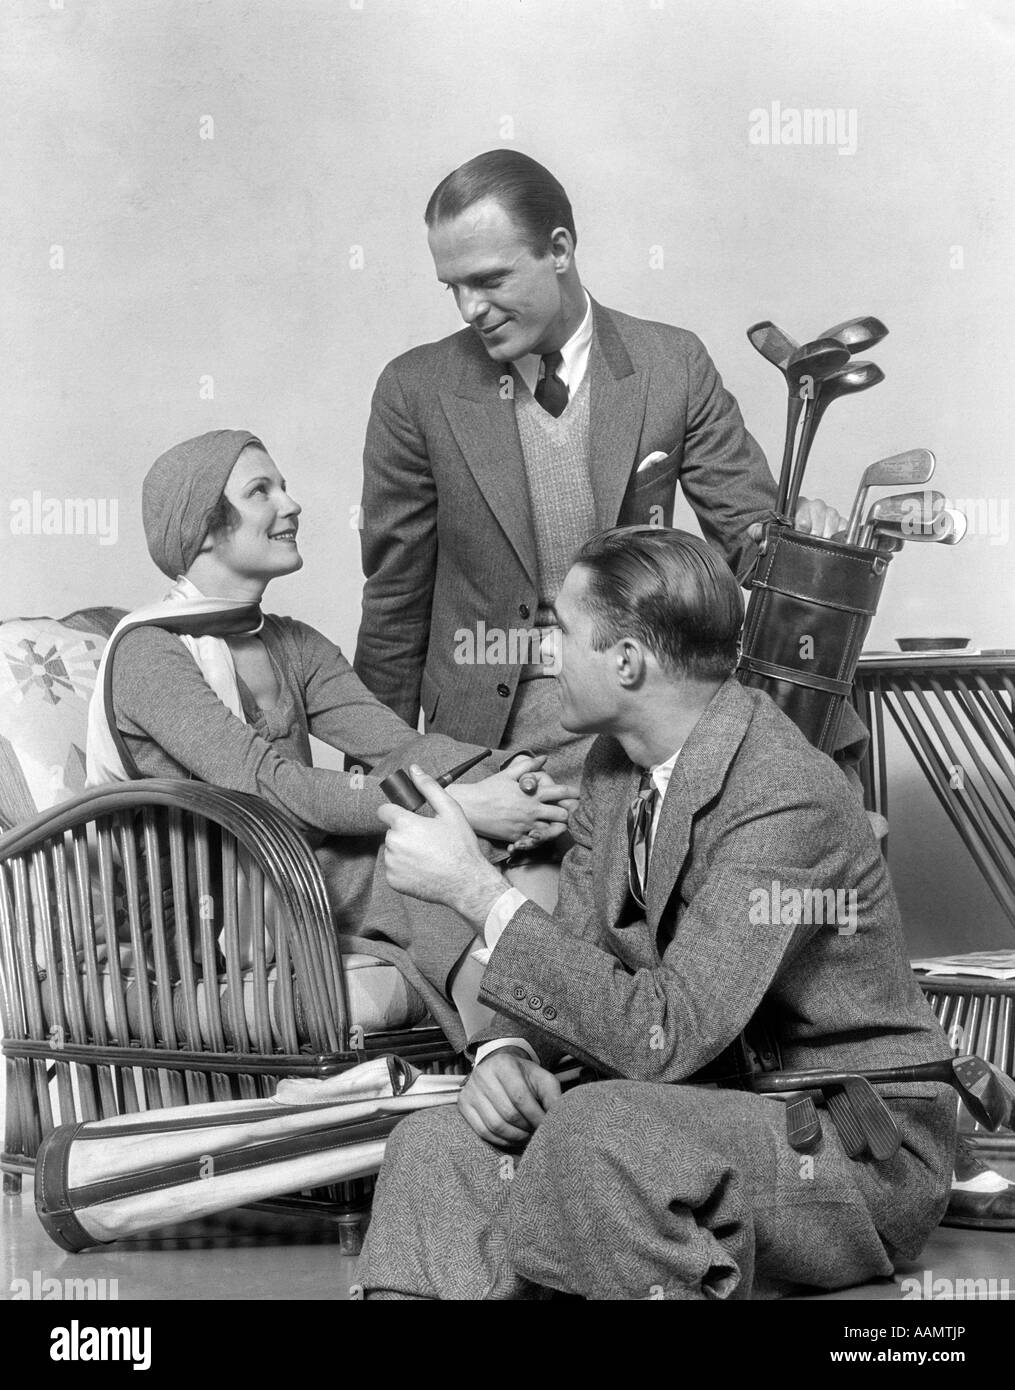 1930s TWO MEN ONE WOMAN GOLF CLUBS BAG SMILING TALKING SITTING BAMBOO CHAIR MAN SMOKING PIPE Stock Photo